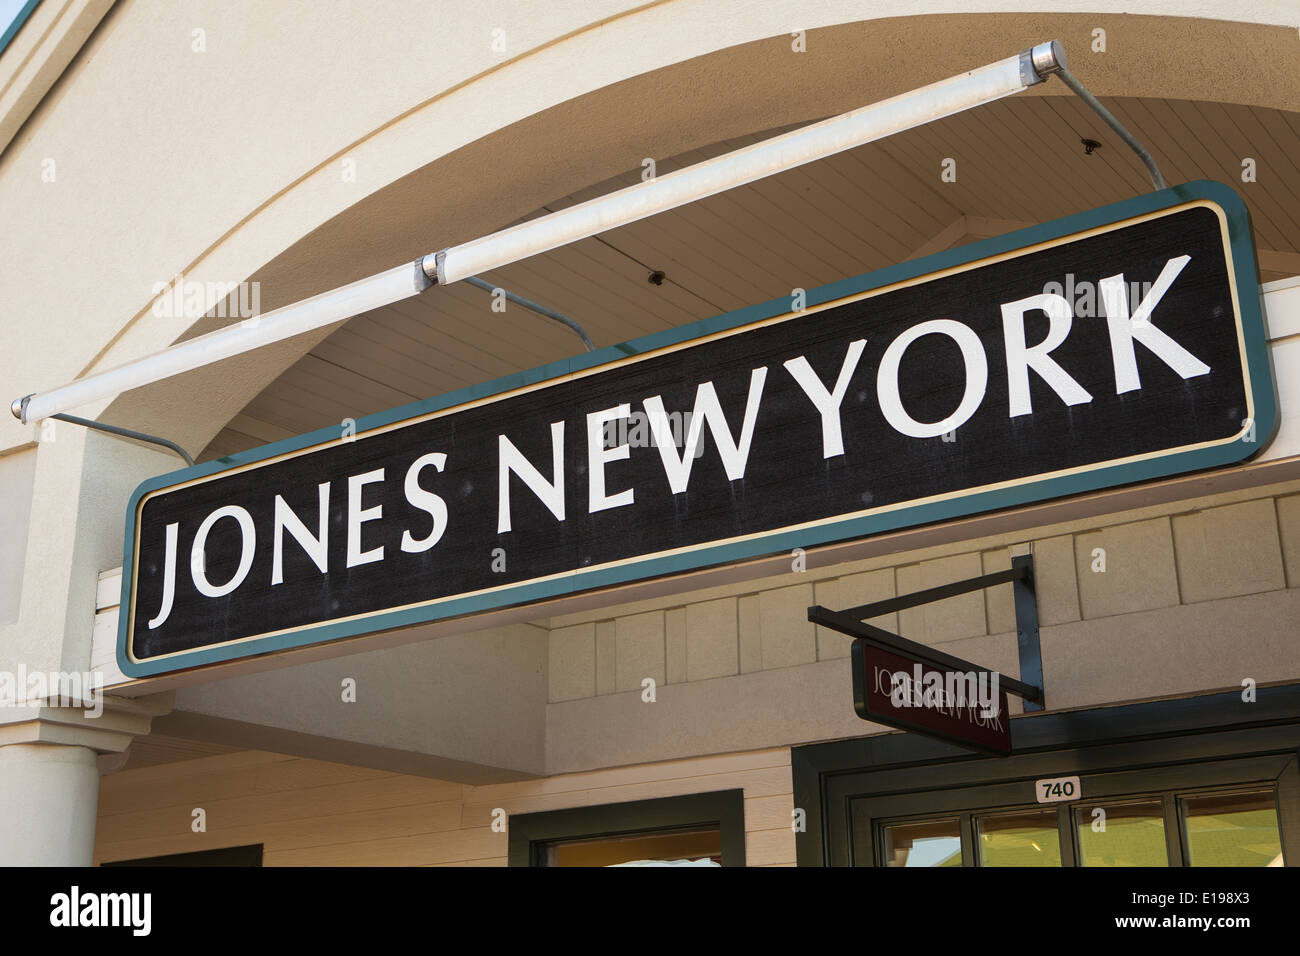 Jones New York store is pictured in Tanger Outlets in Sevierville, Tennessee Stock Photo